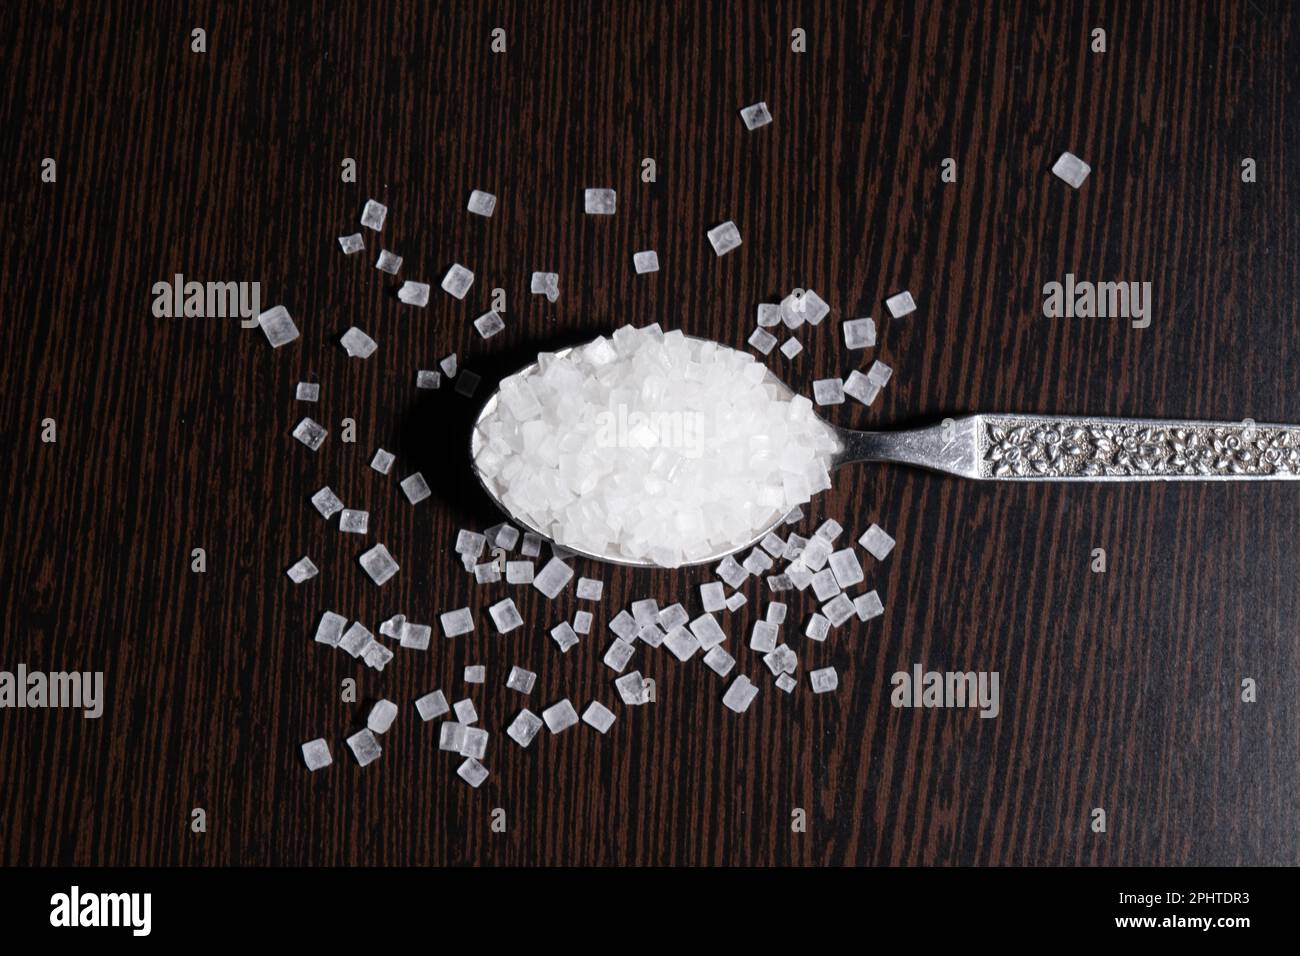 Top view of Sugar granules in spoon on the table Stock Photo